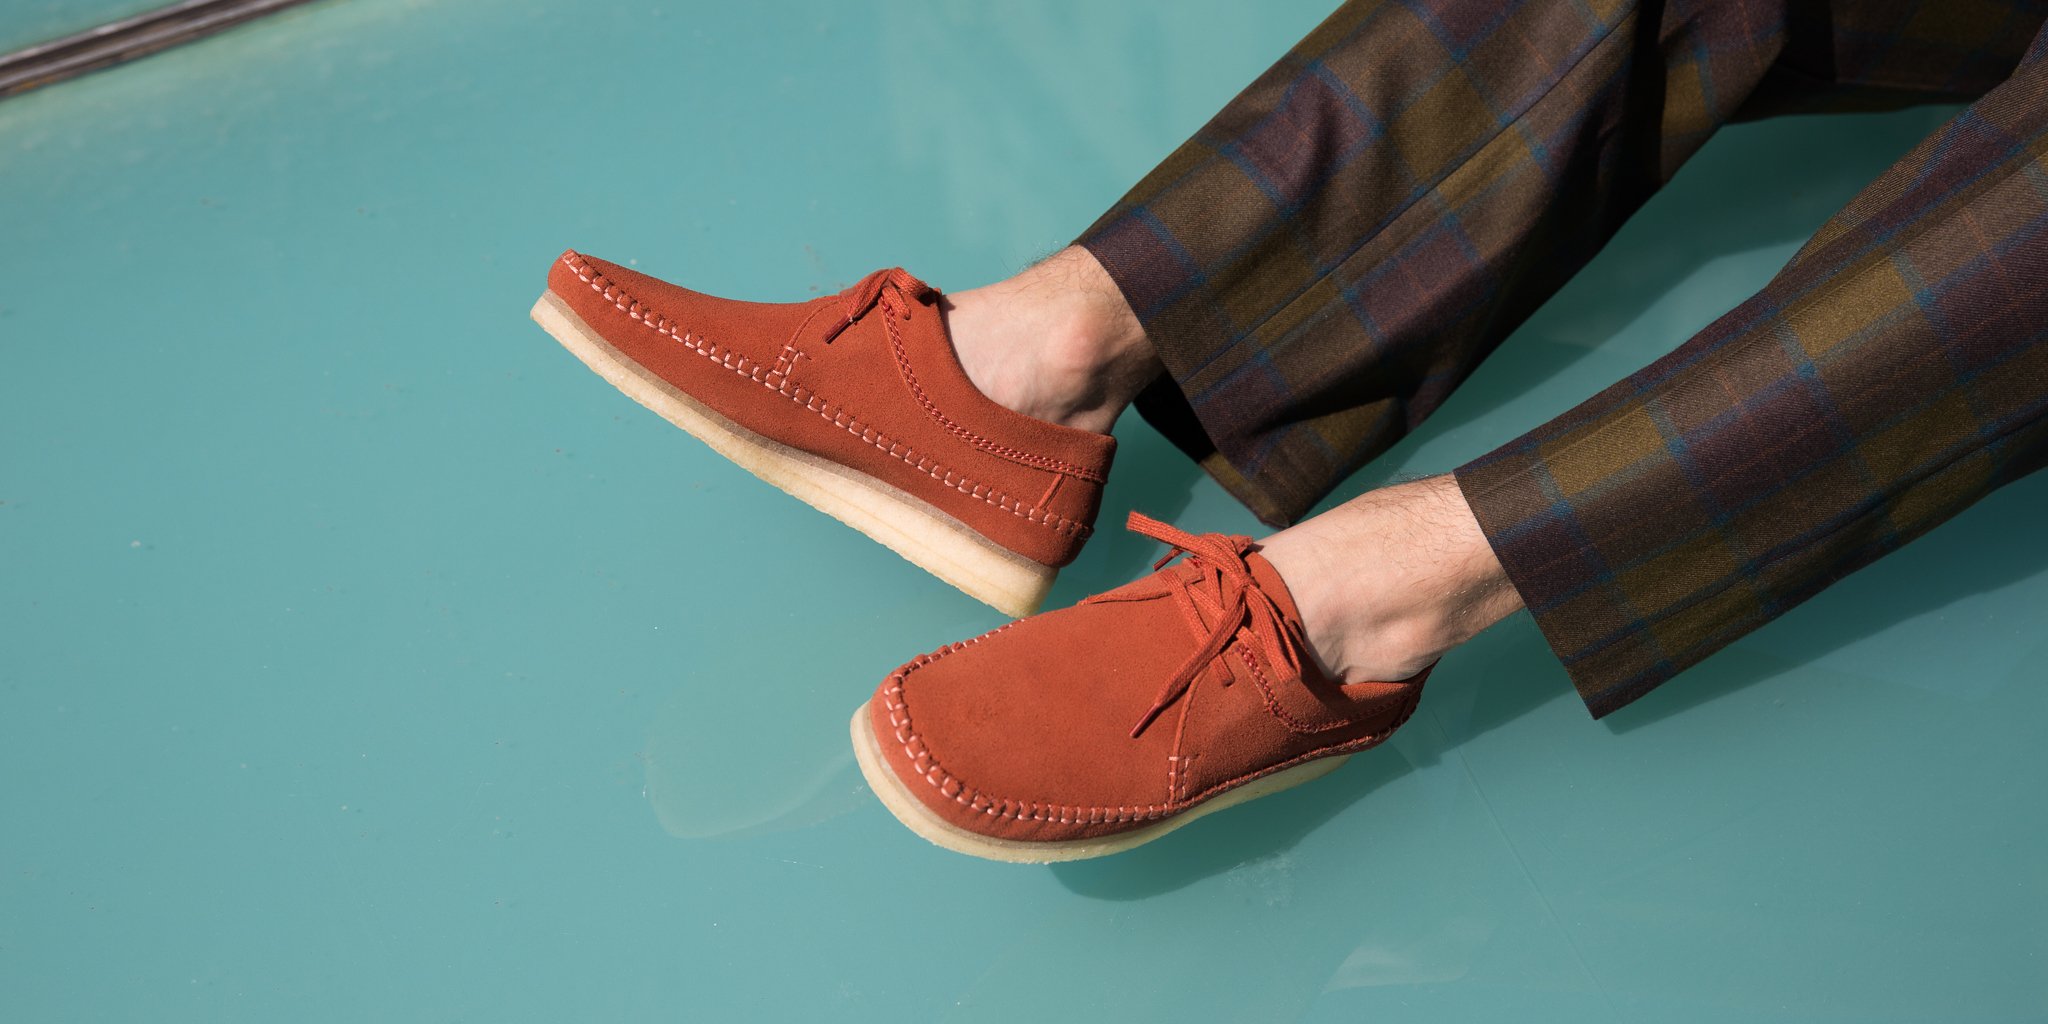 Titolo on Twitter: "#newarrivals Clarks Originals Weaver - Brick Red Suede to the webSHOP ➡️ #clarksoriginals #wallabee #weaver https://t.co/1g9s2O72BA" / Twitter